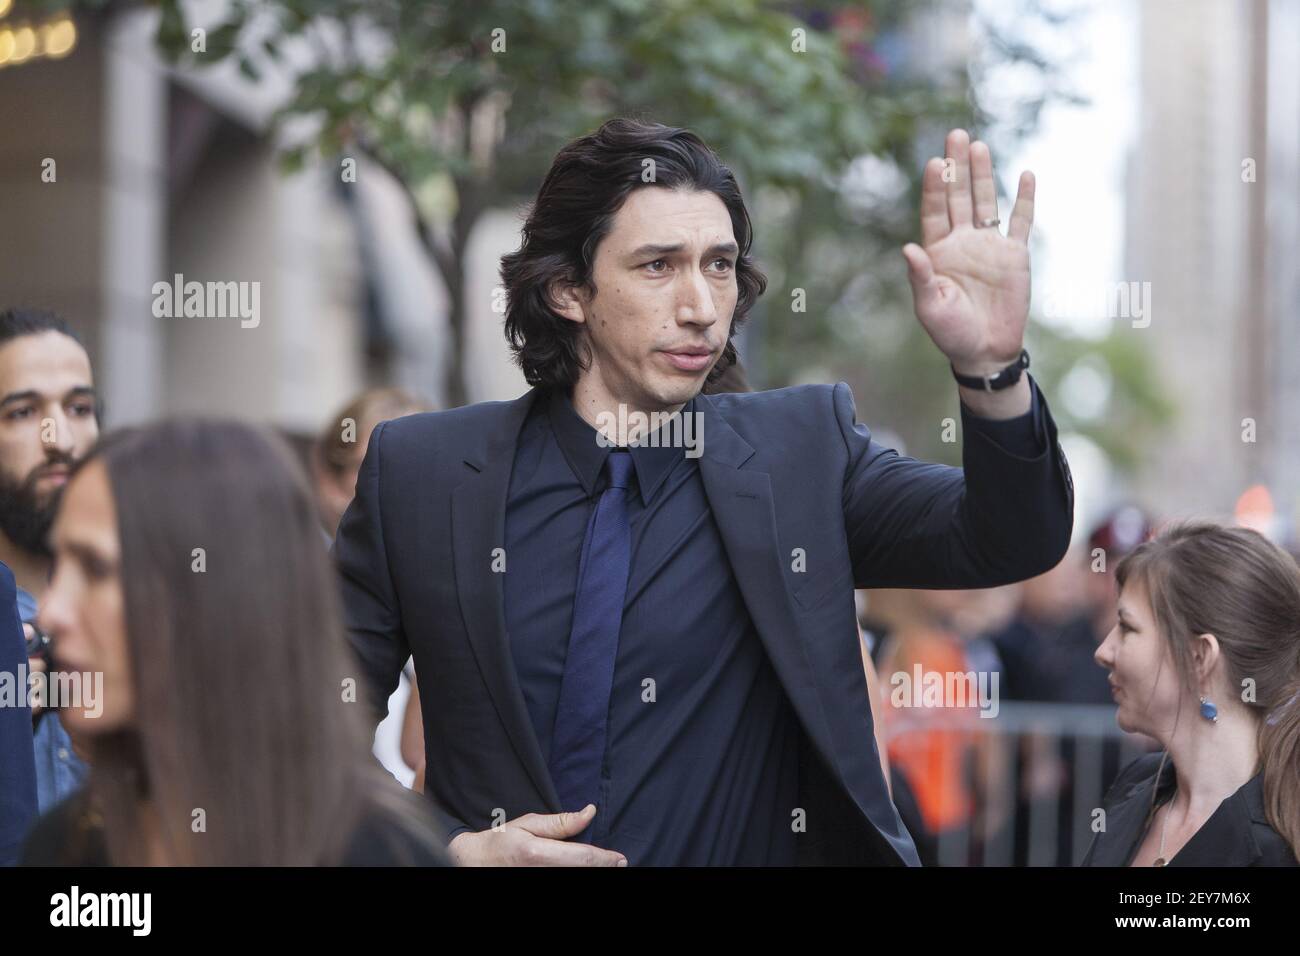 Sept 6, 2014. Toronto, CANADA ) Actor Adam Driver waves to fans during the  premiere of the film "While we're young" at the Princess of Wales Theatre  during the 2014 Toronto